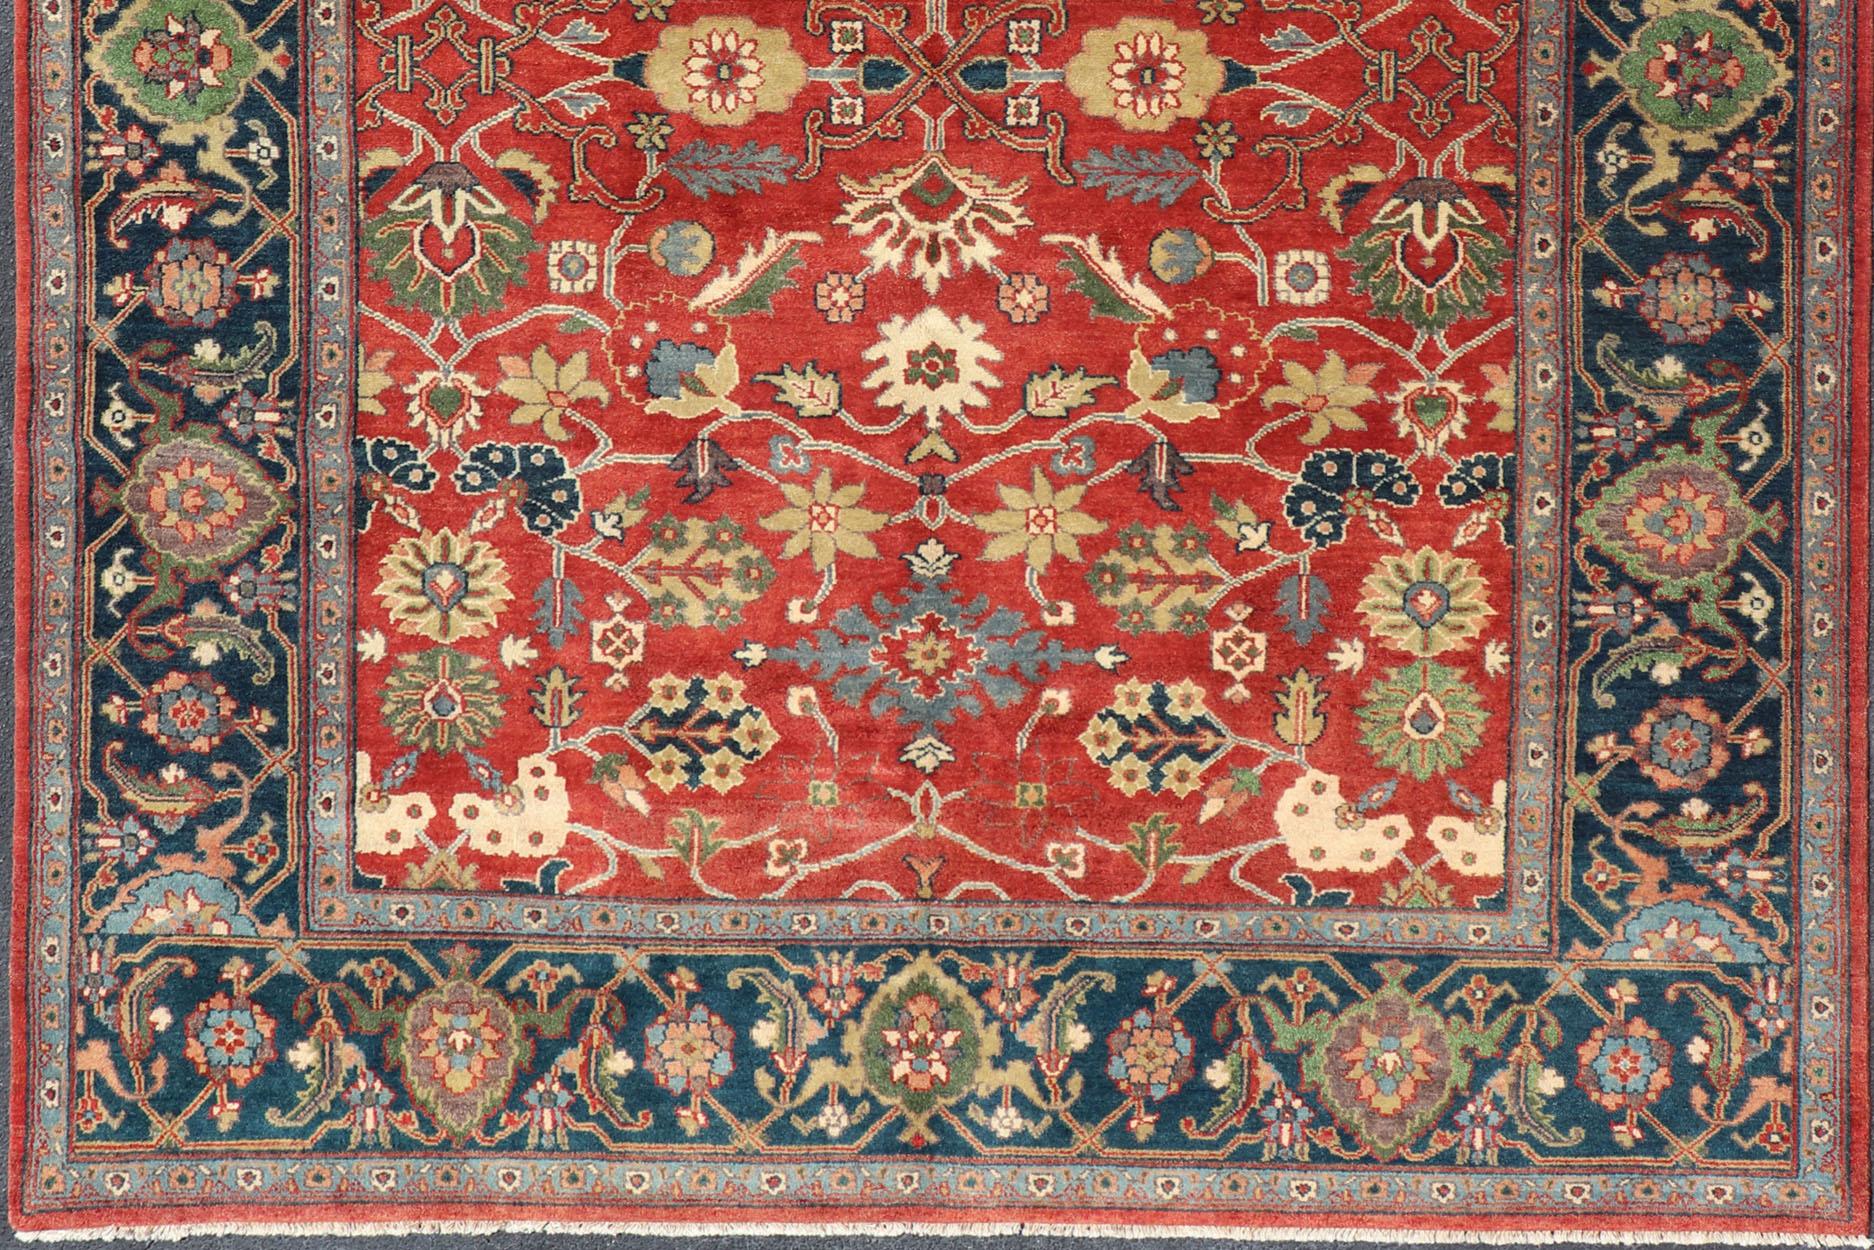 Reproduction Sultanabad-Mahal All-over Floral Hand-Knotted Carpet  9